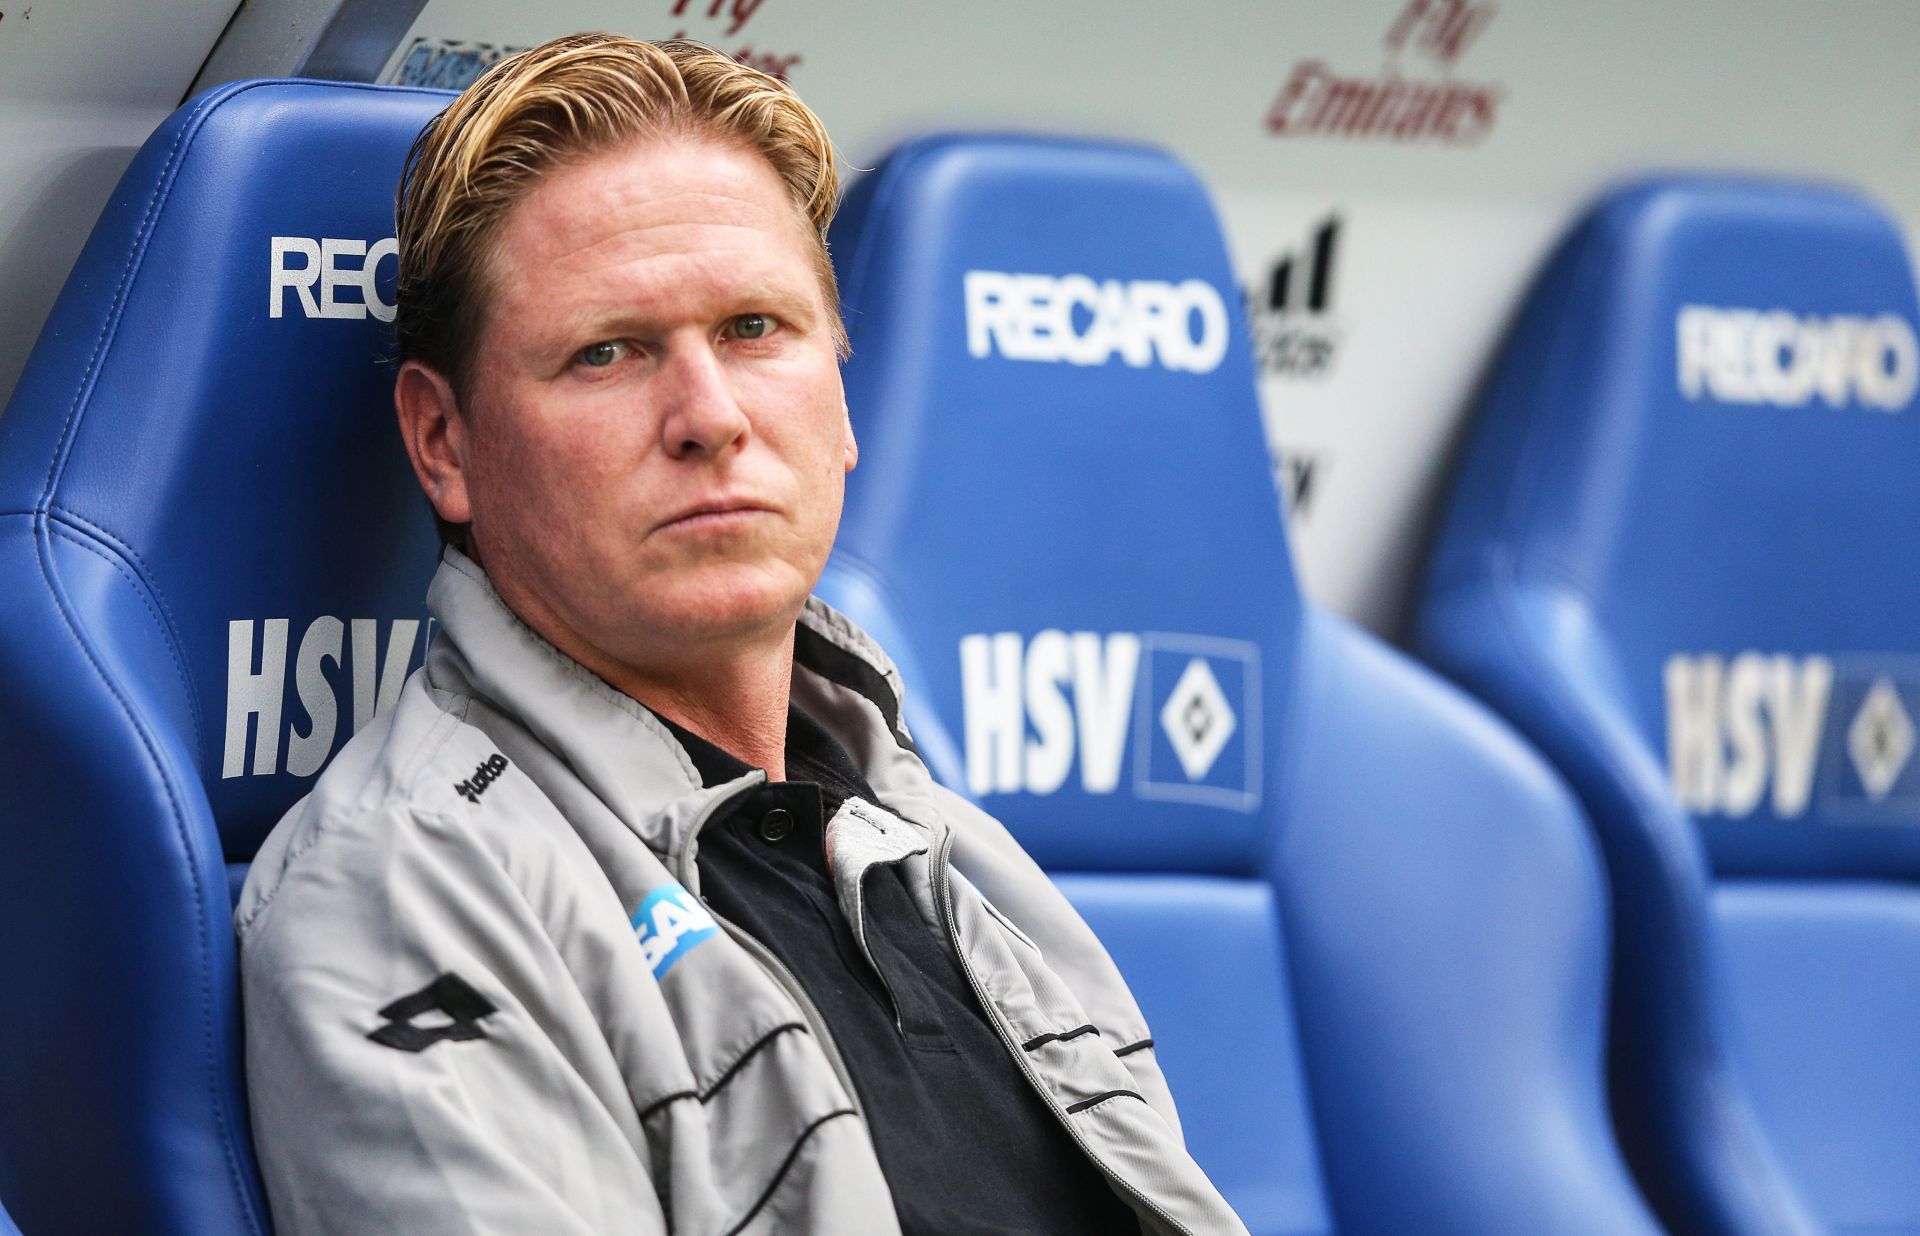 epa05556037 (FILE) A file picture dated 19 October 2014 of then Hoffenheim head coach Markus Gisdol before the German Bundesliga soccer match between SV Hamburg and TSG 1899 Hoffenheim in Hamburg, Germany. Struggling German Bundesliga side SV Hamburg on 25 September 2016 confirmed the signing of Markus Gisdol as new head coach replacing Bruno Labbadia, German media reports stated.  EPA/AXEL HEIMKEN